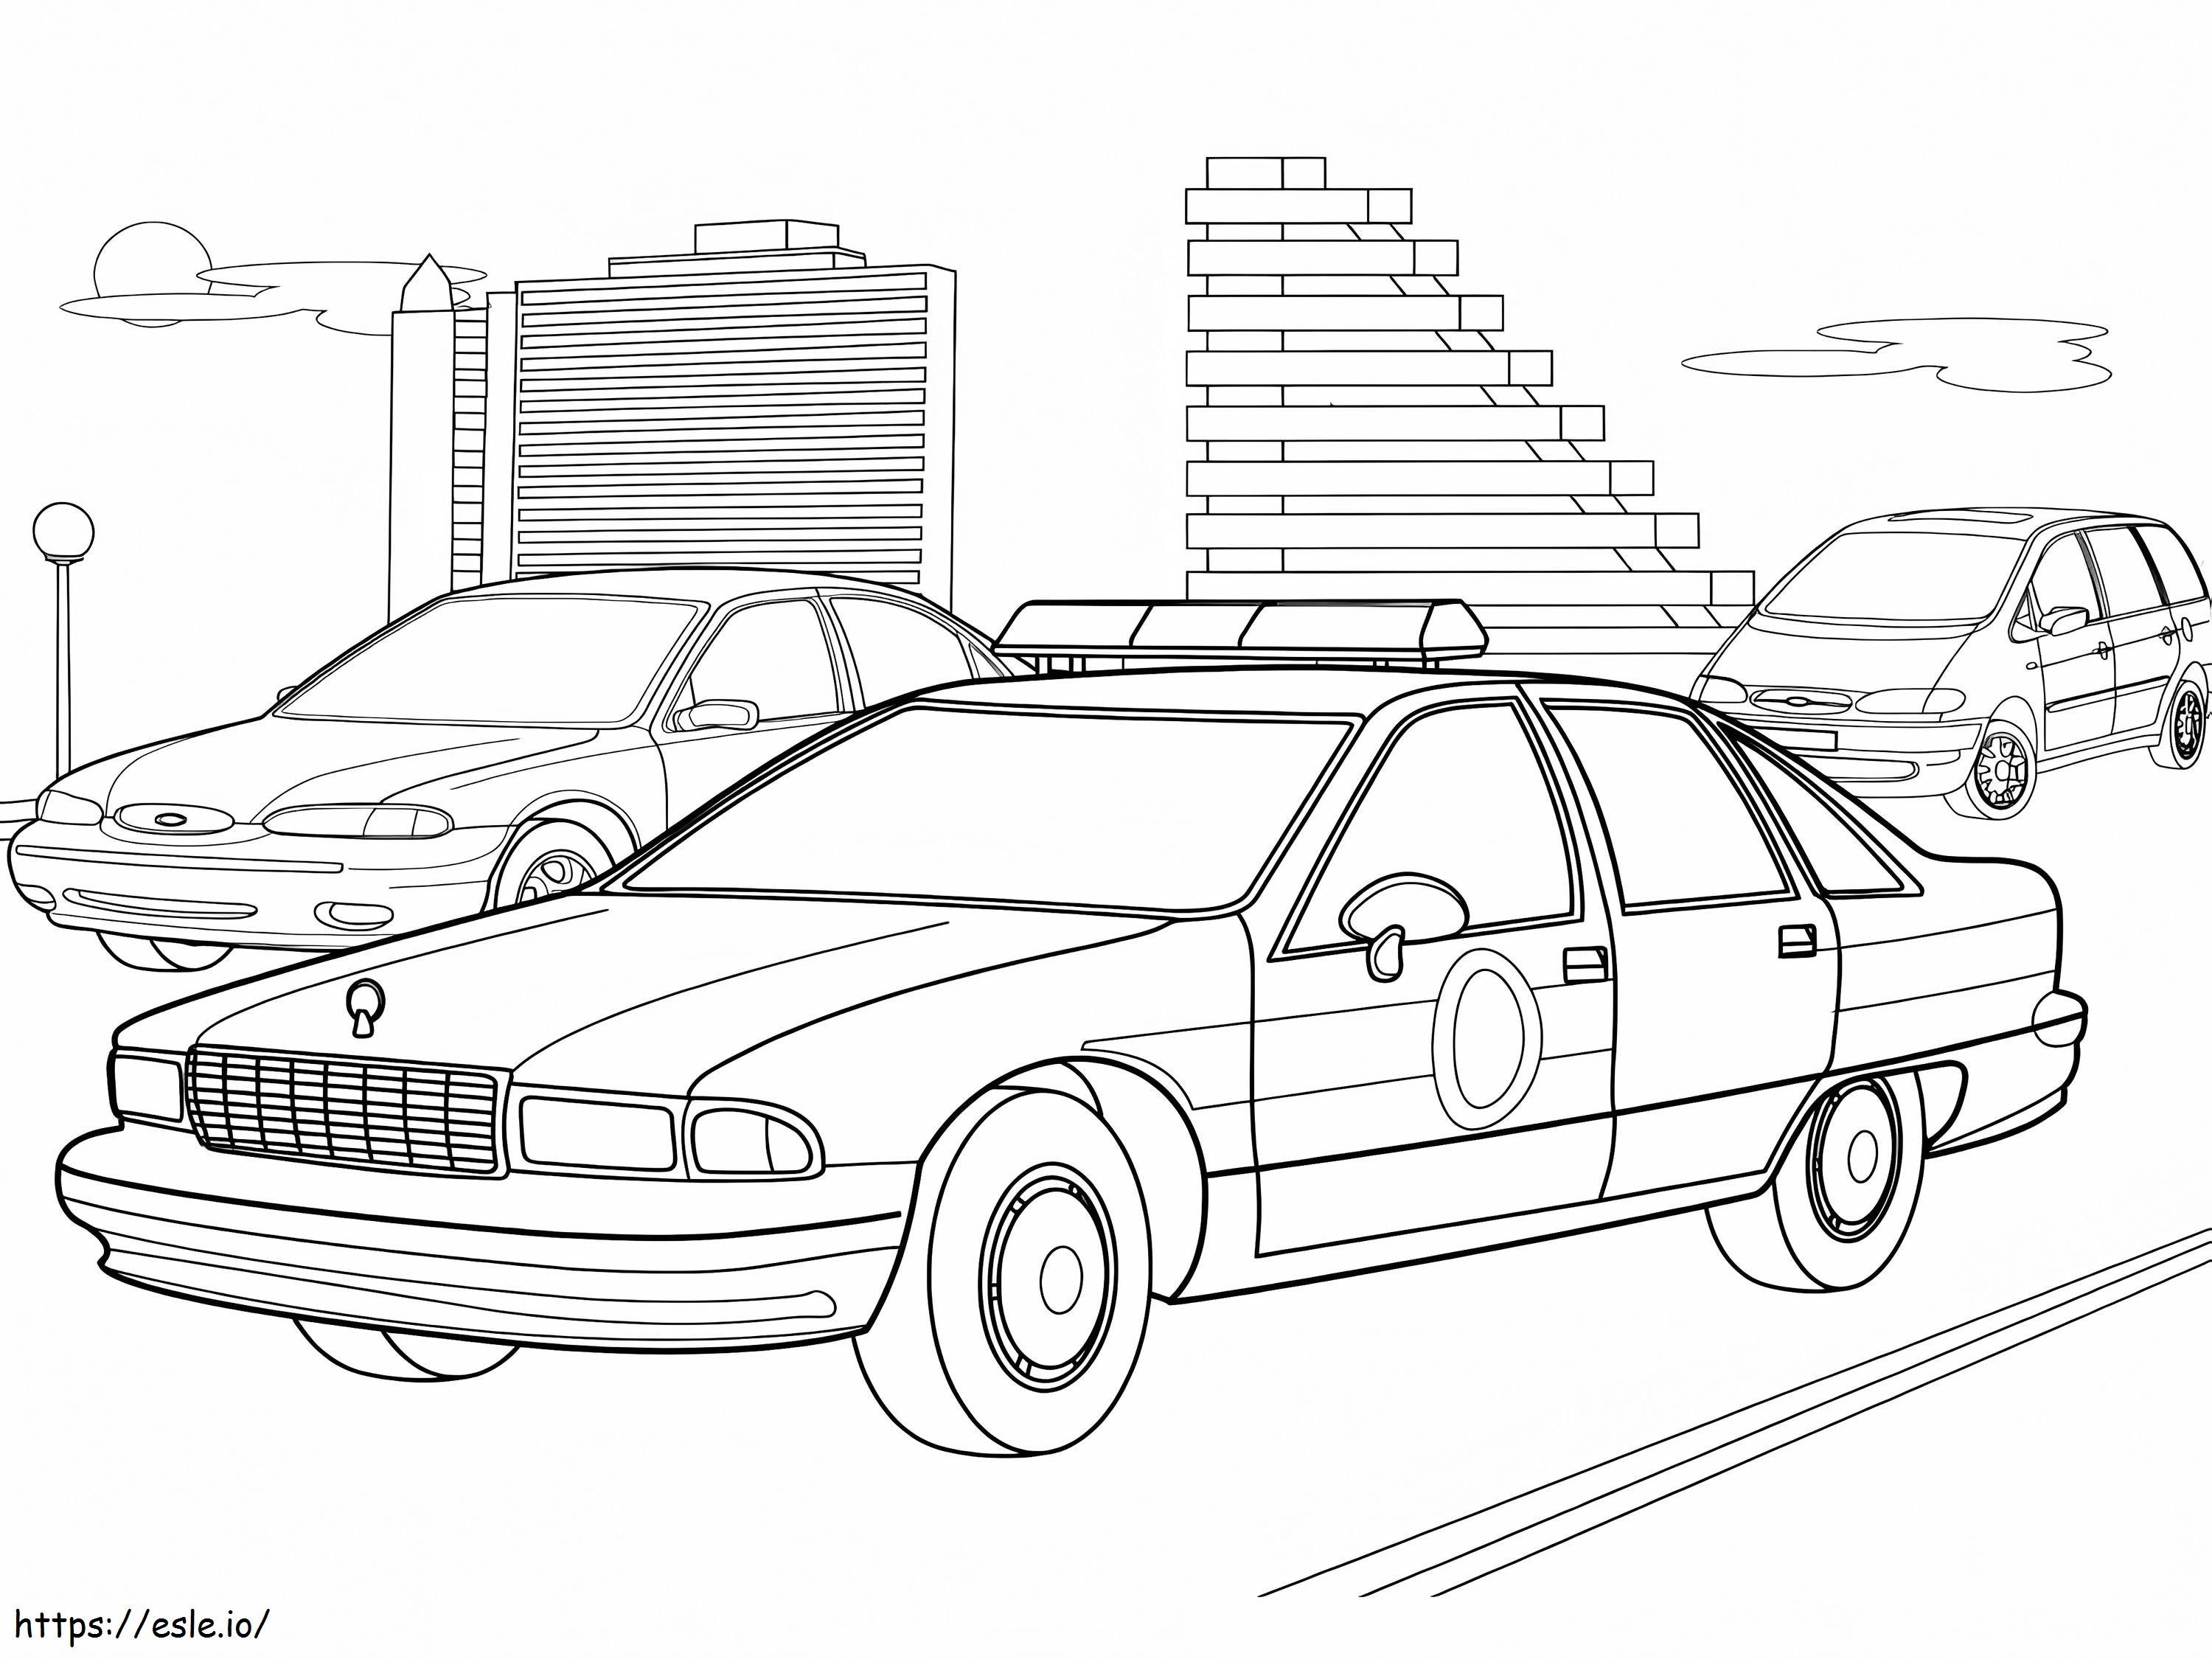 Police Car In The City coloring page